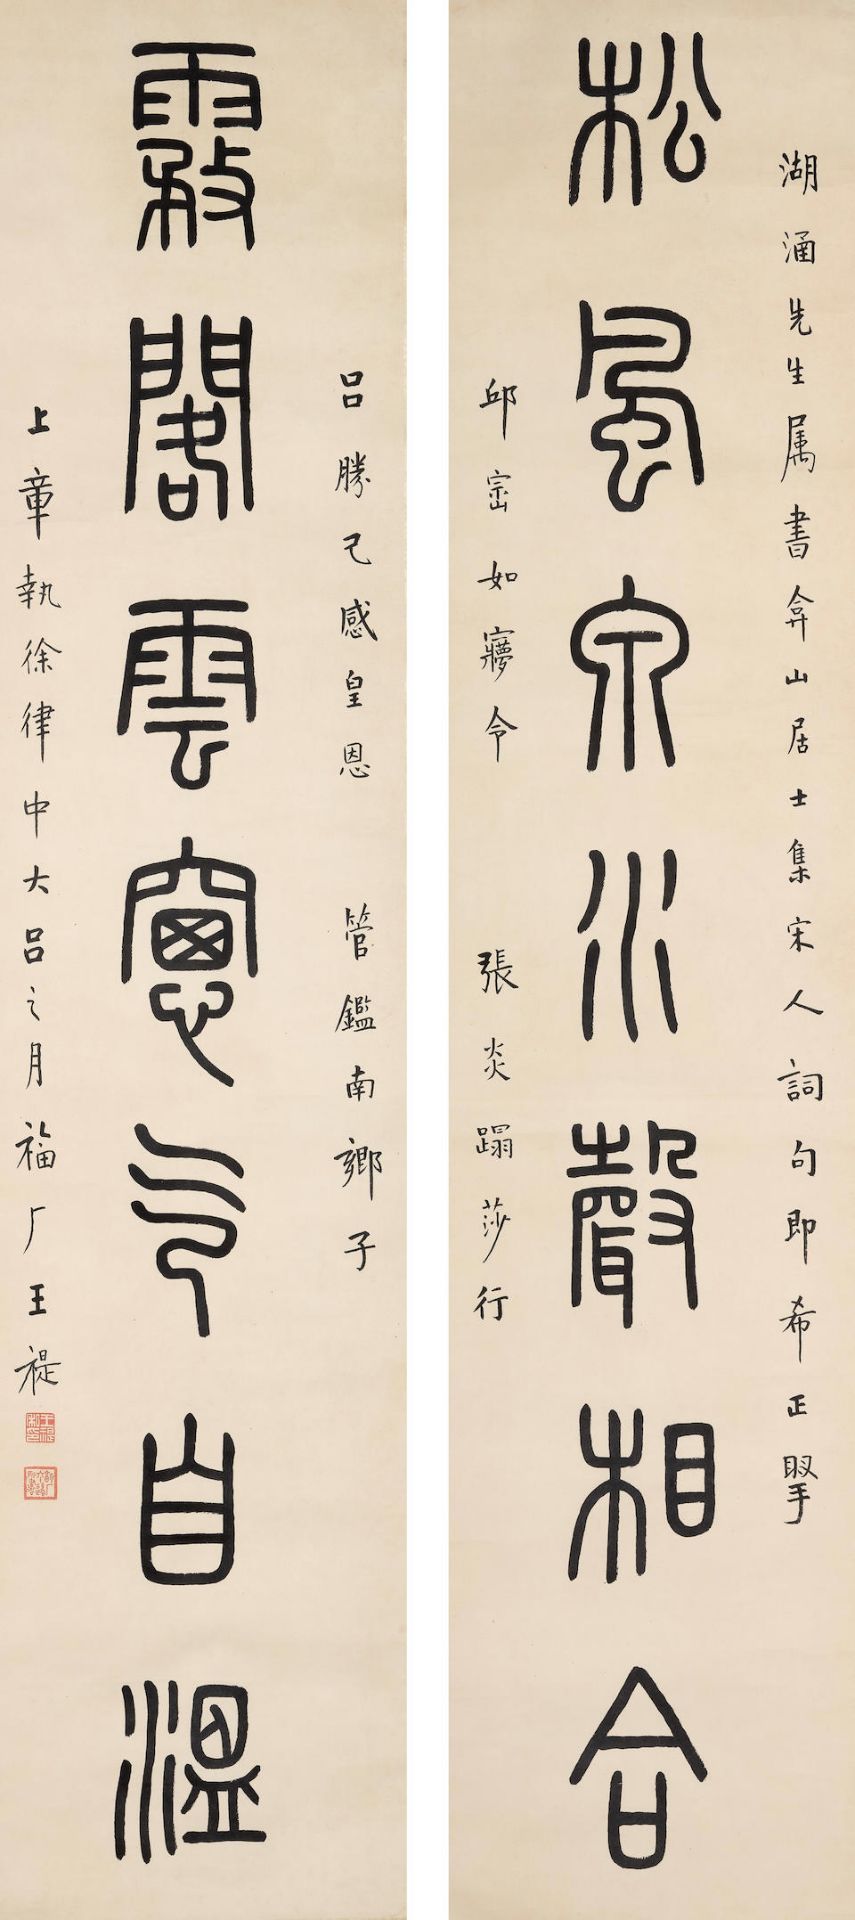 WANG FU'AN (1880-1960) Calligraphy Couplet in Seal Script, 1940